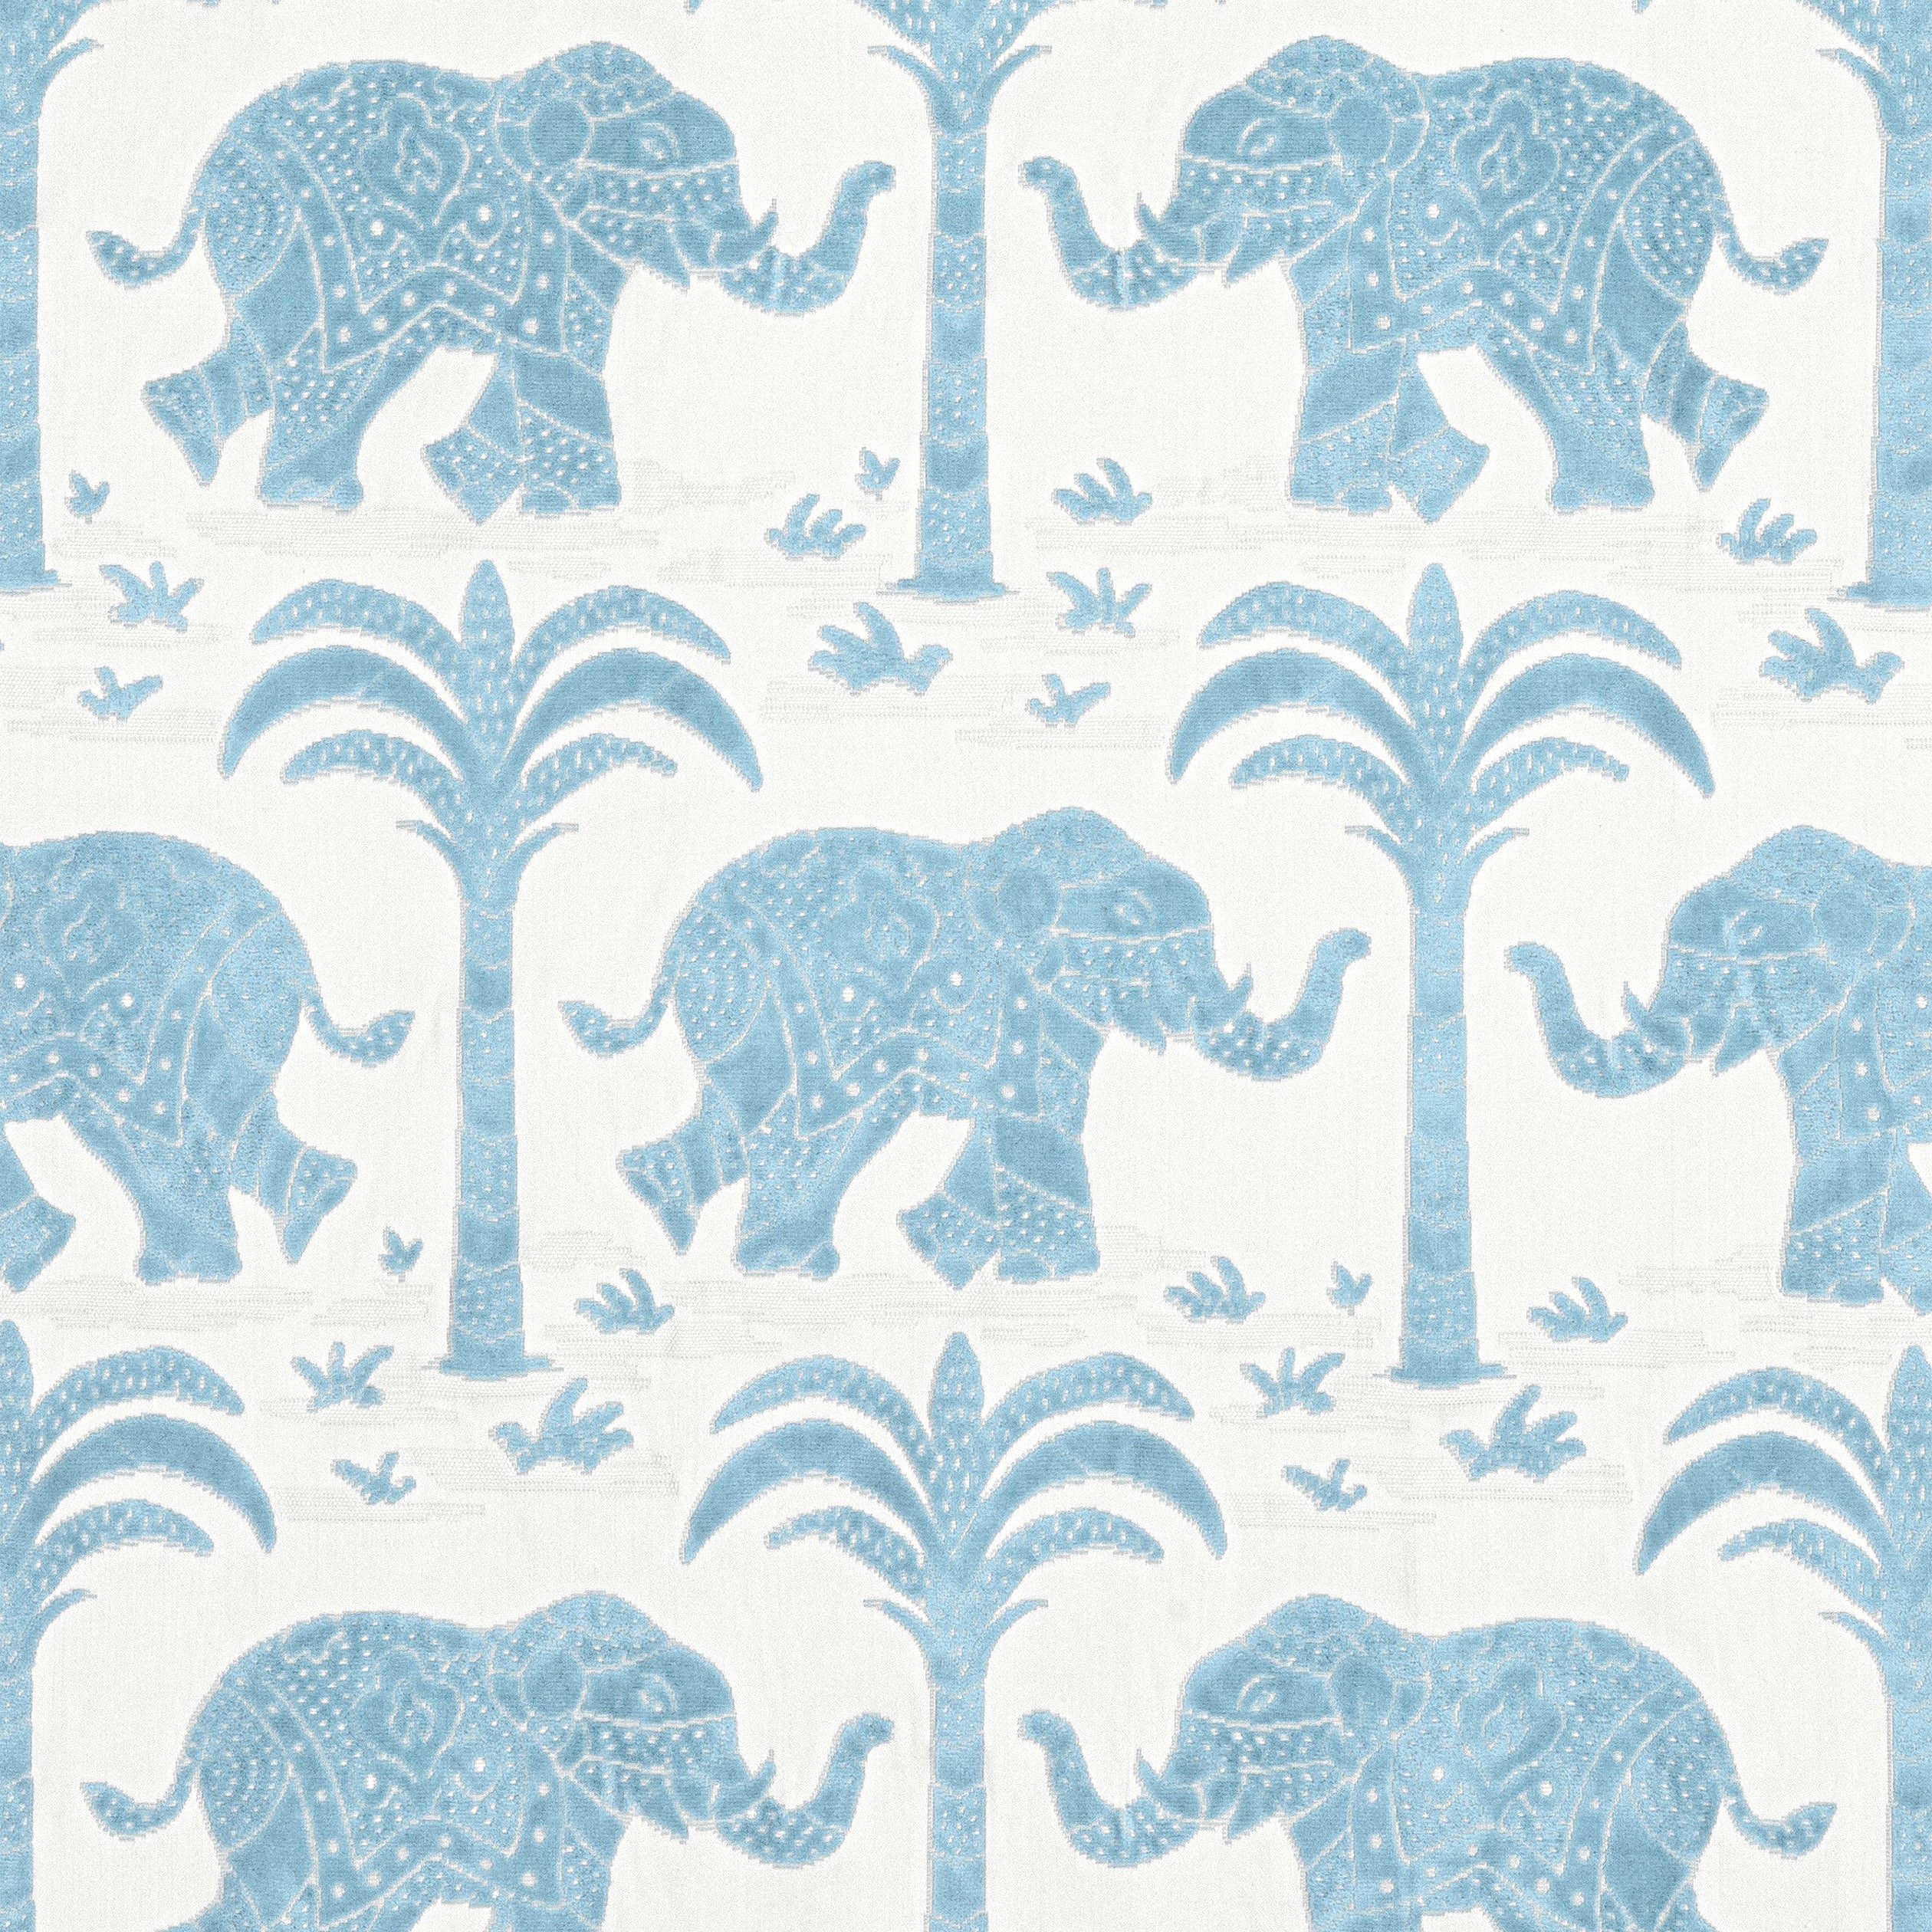 Elephant Velvet fabric in french blue color - pattern number W716204 - by Thibaut in the Kismet collection